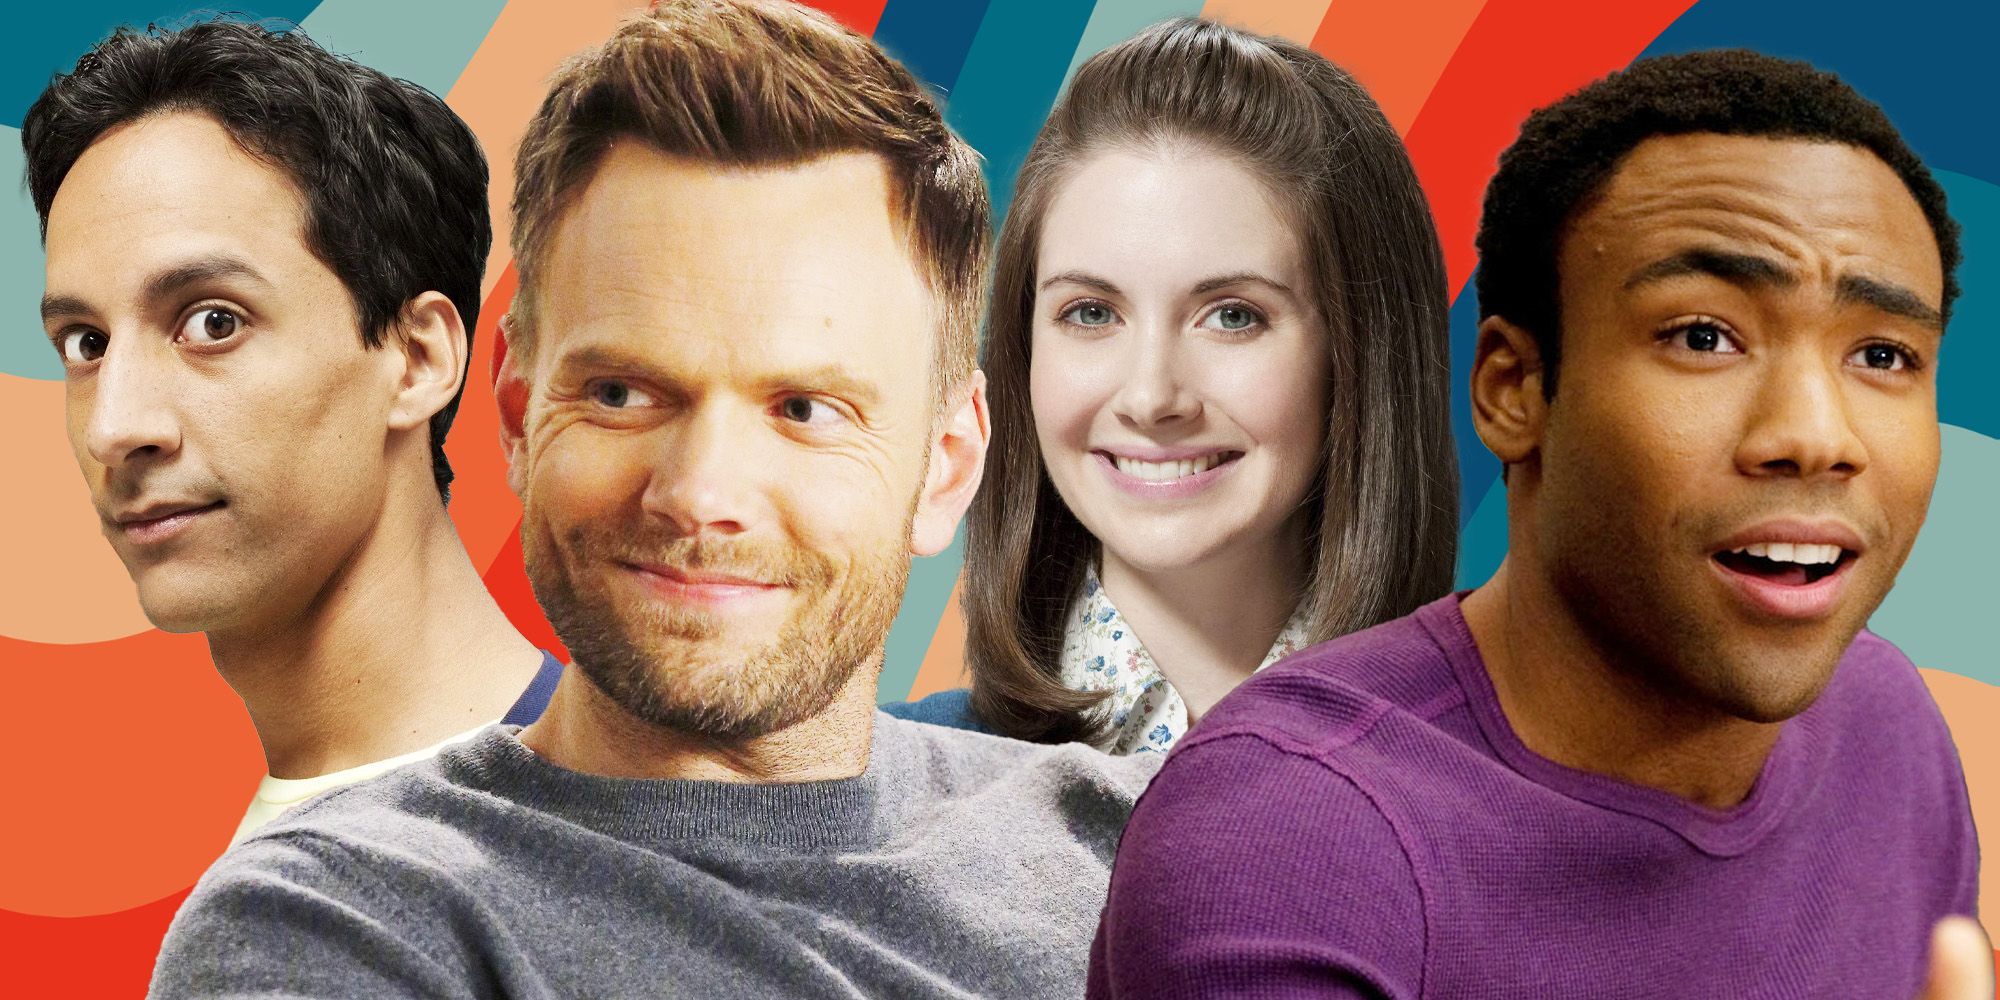 Collage of Abed, Jeff, Annie and Troy from Community